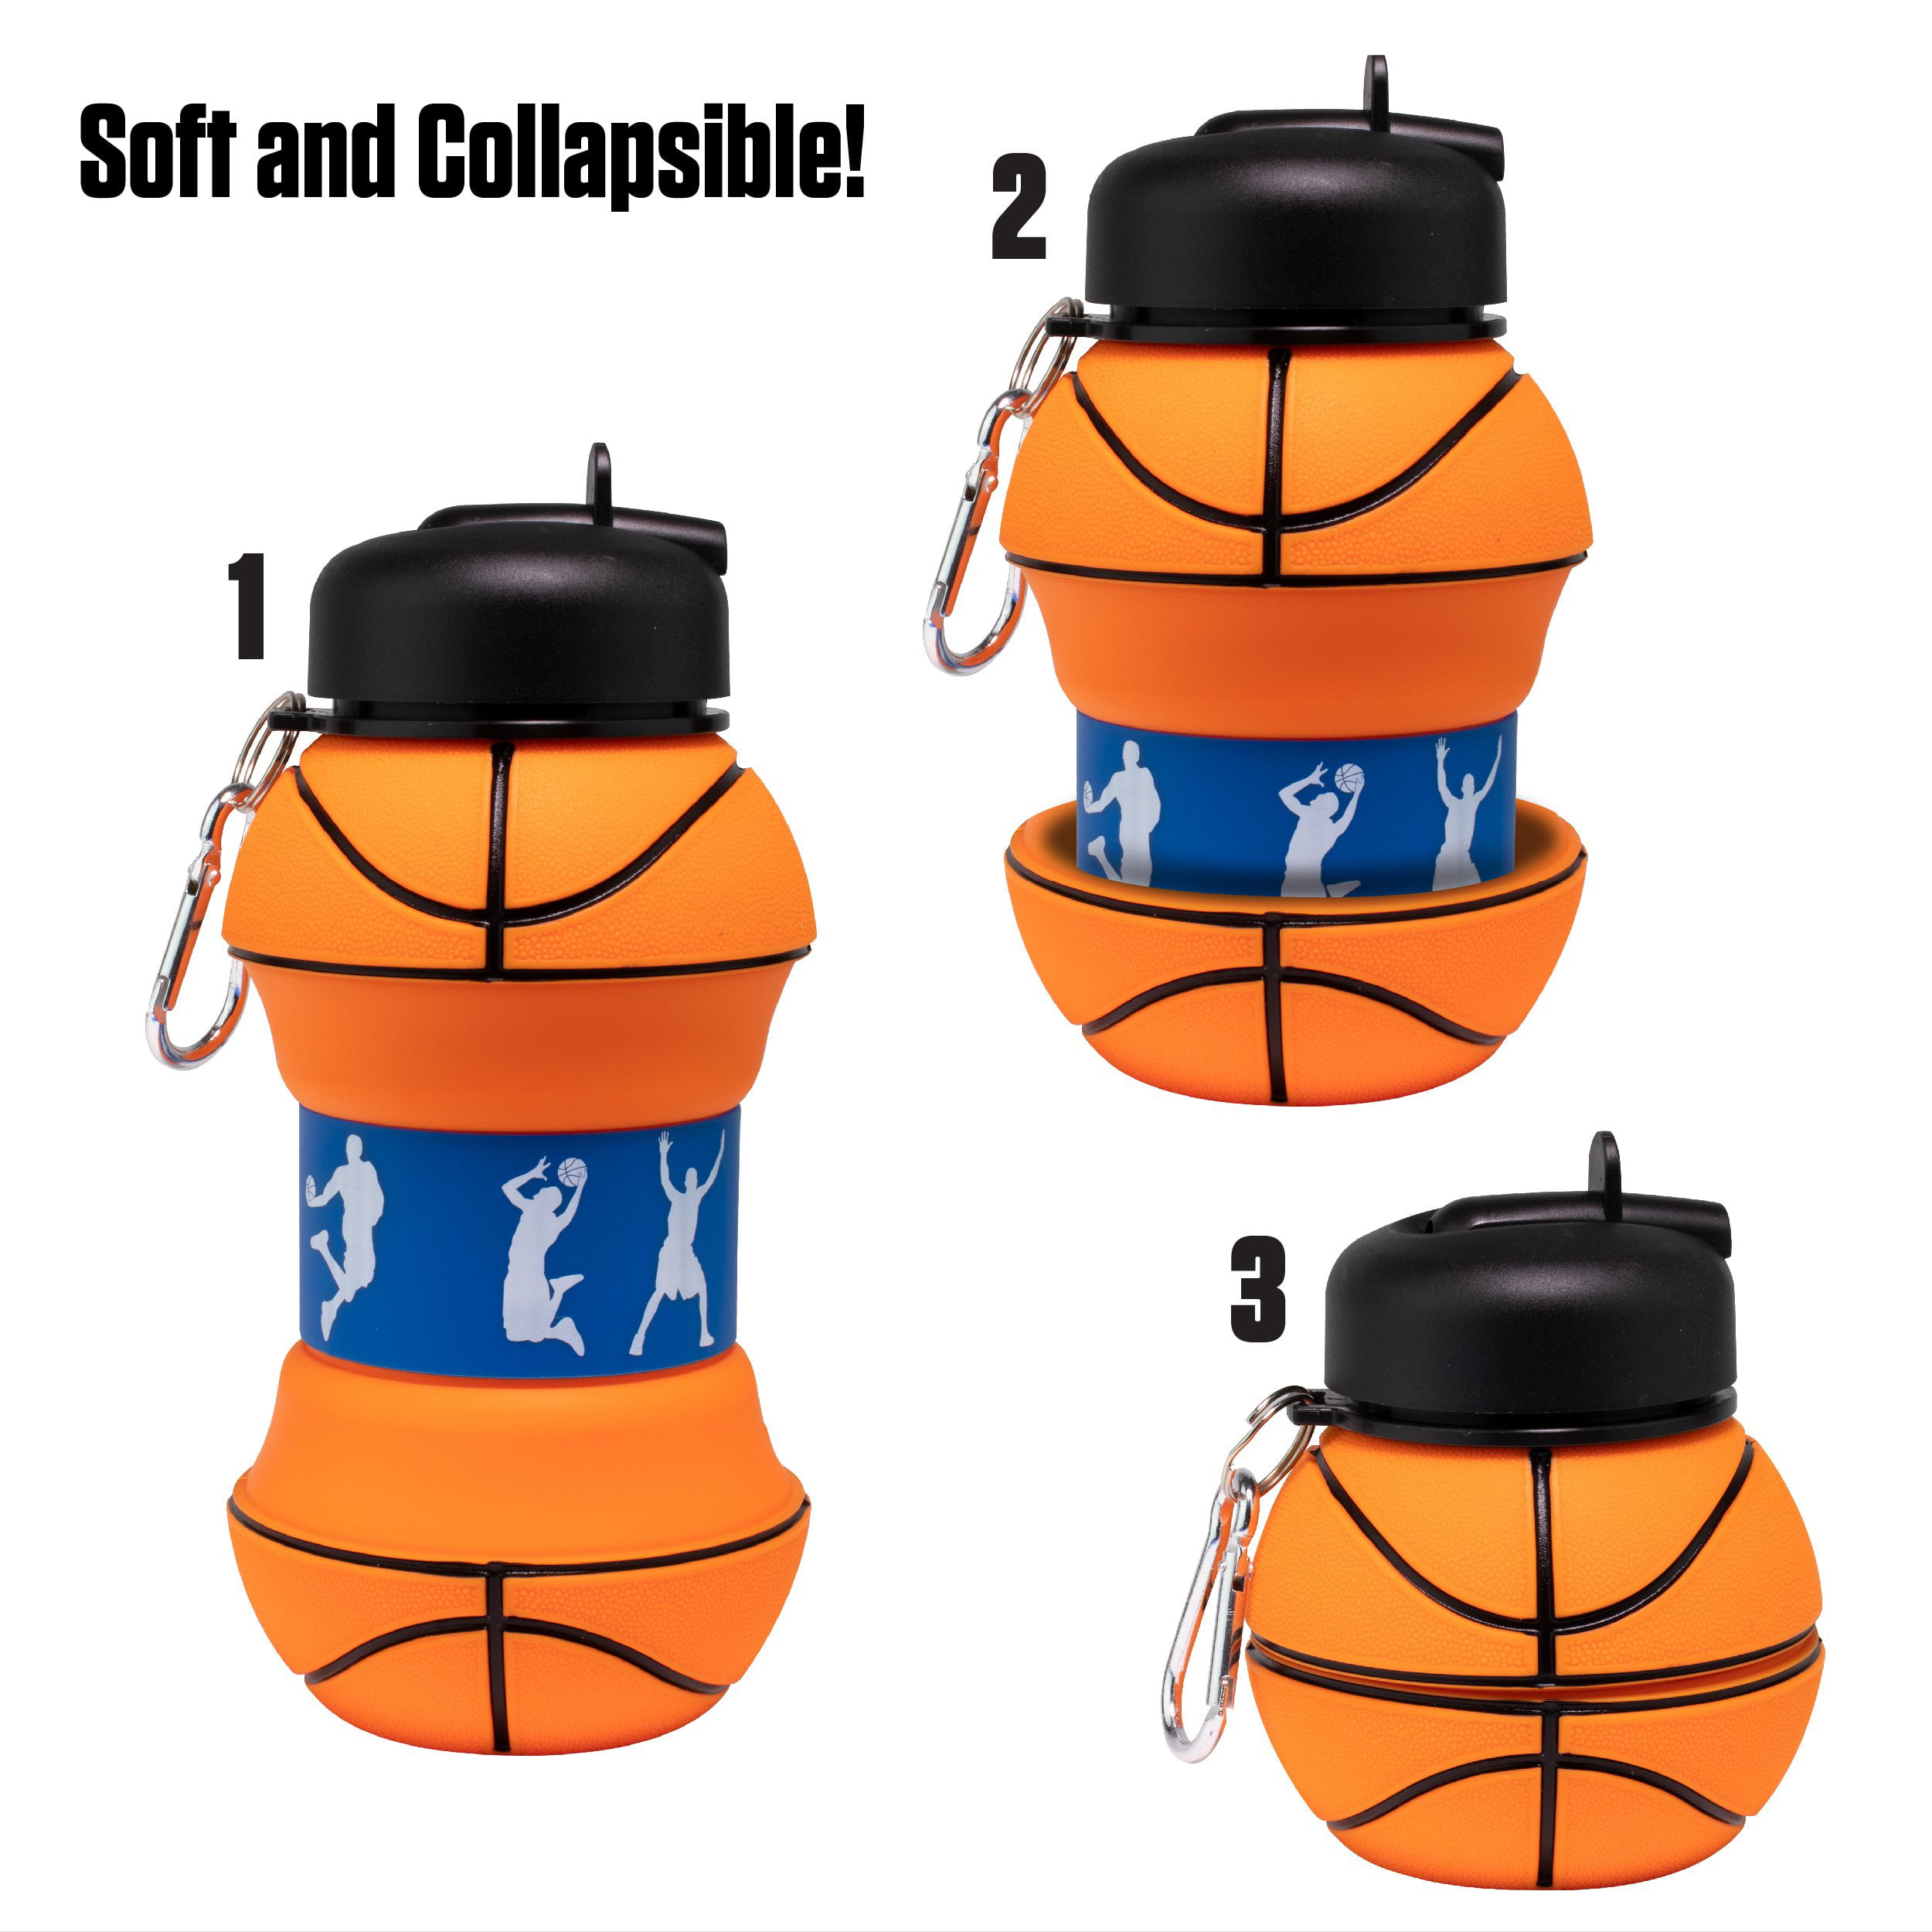 Maccabi Art 8726 18 oz Collapsible Silicone Soccer Water Bottle